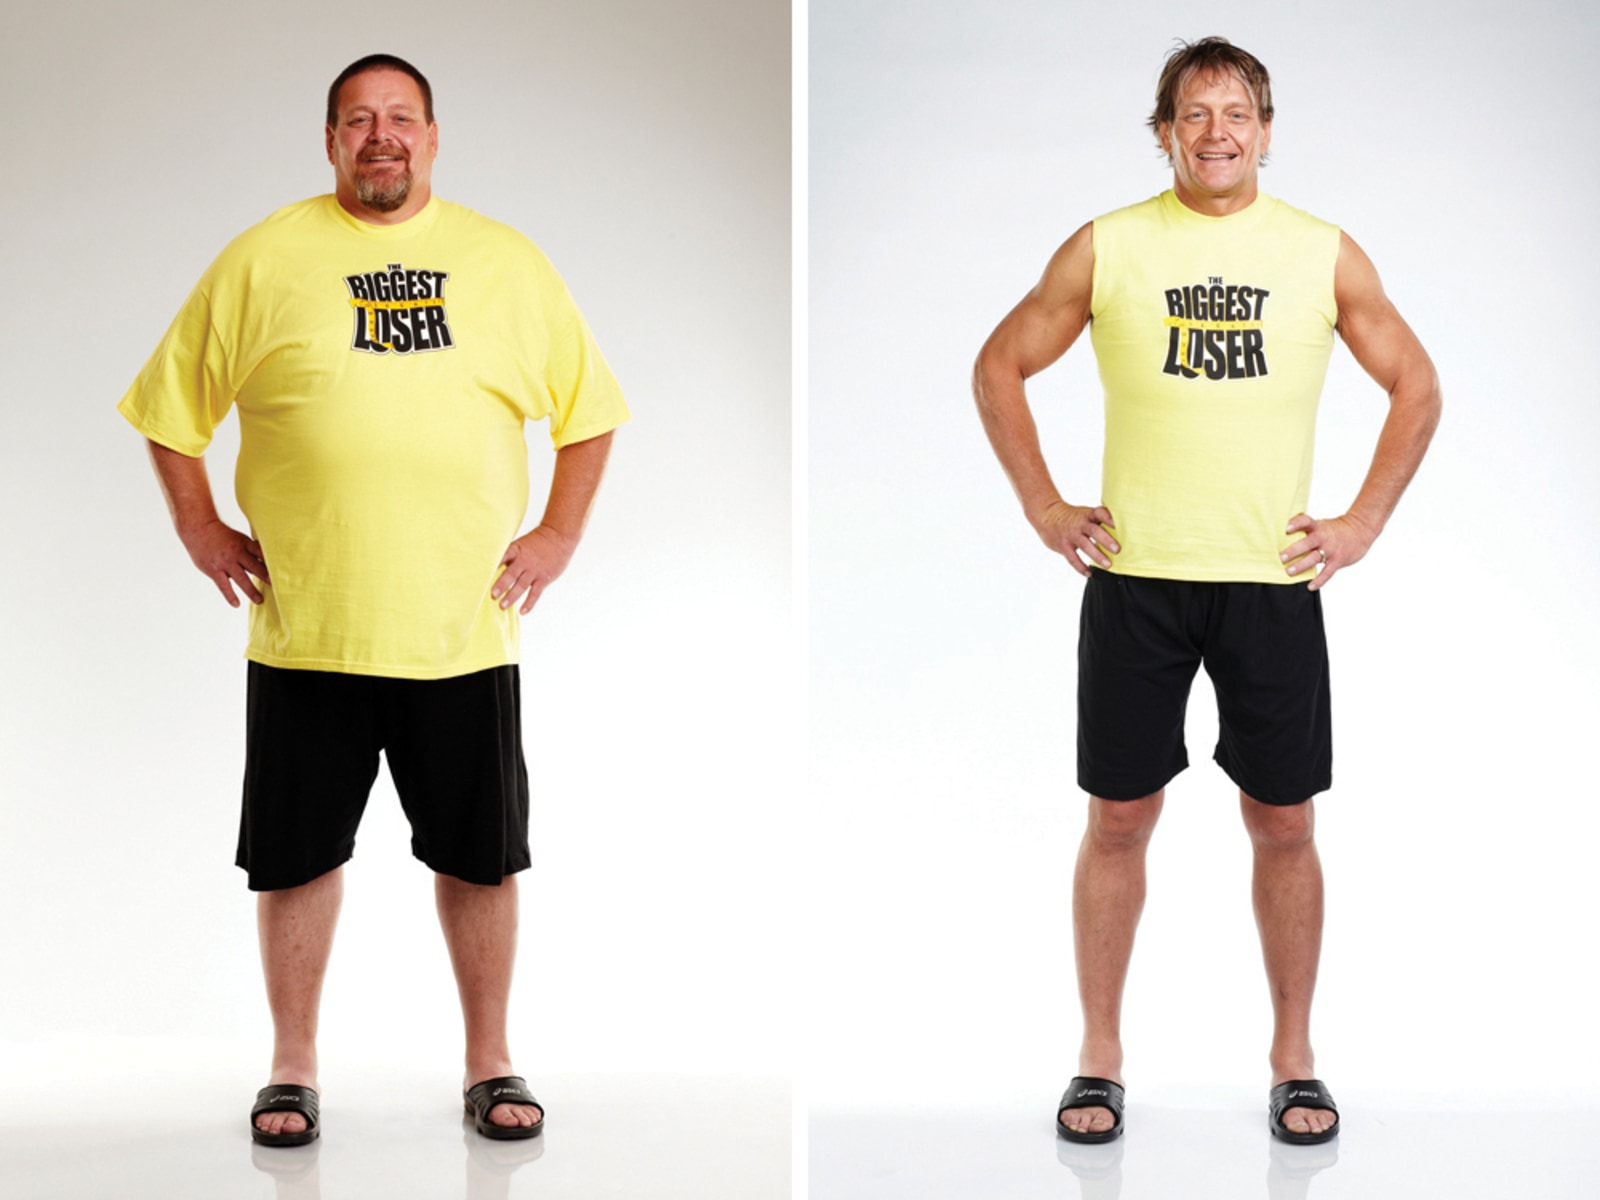 Where To Watch Biggest Loser Uk The Biggest Loser (season 11) - Alchetron, the free social encyclopedia